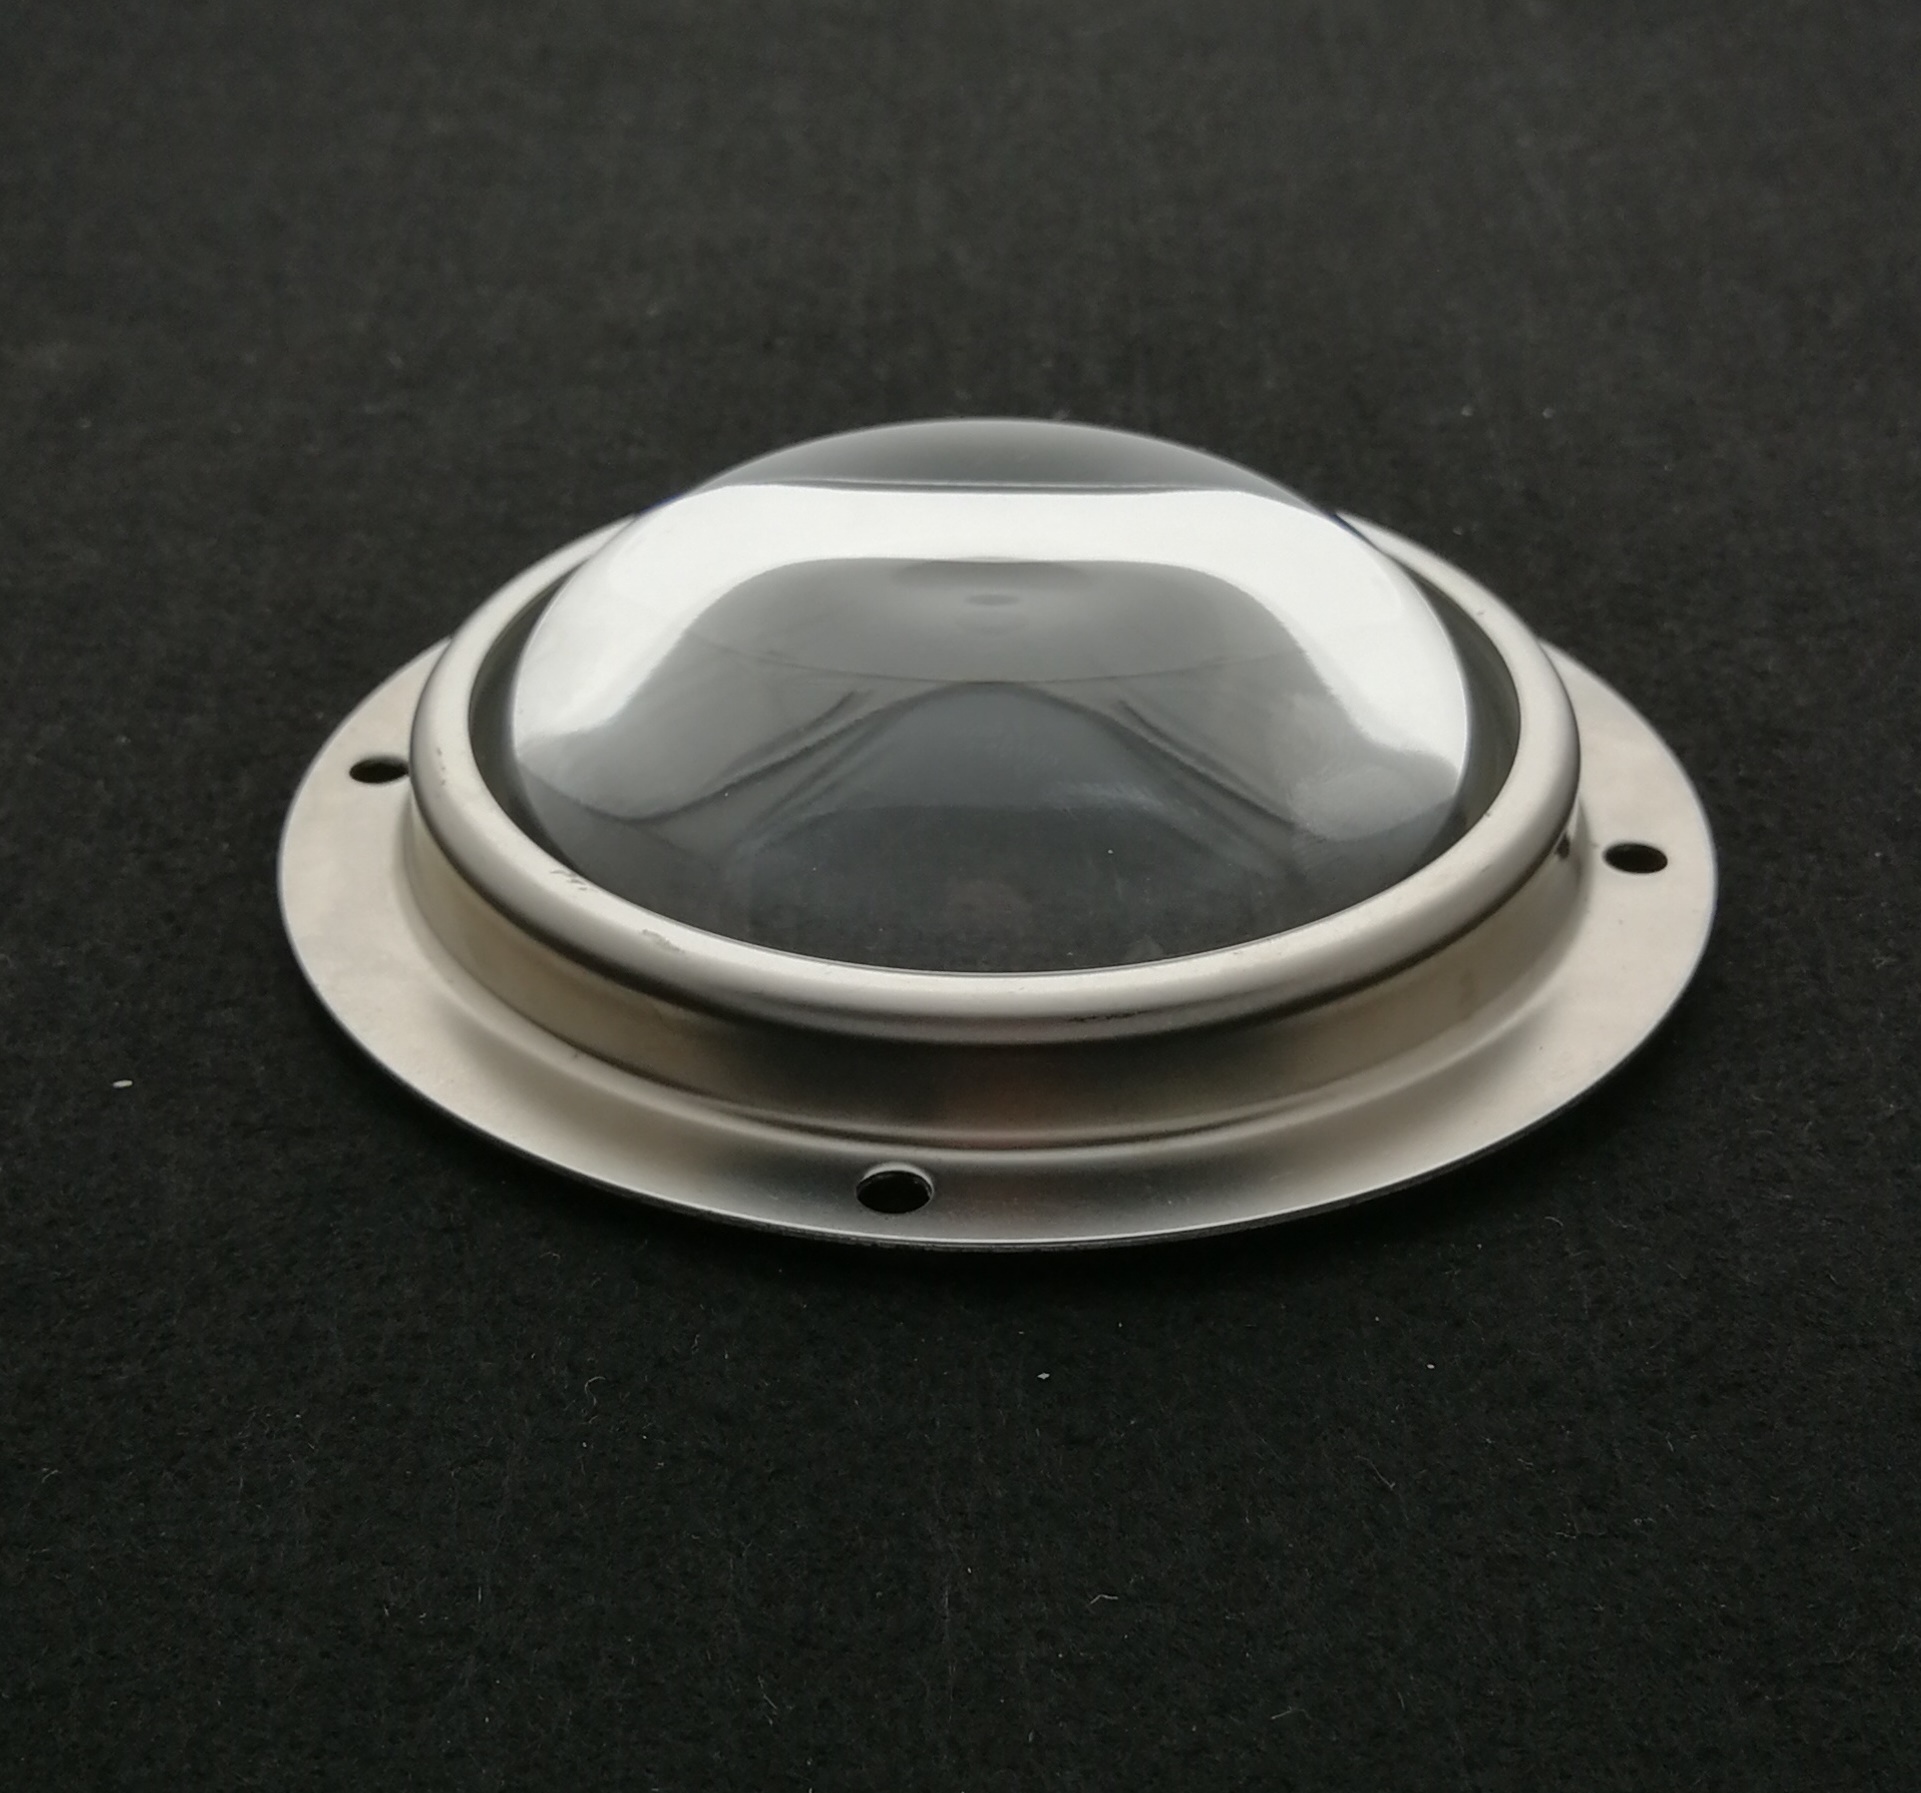 78mm high bay light borosilicate glass lens with silicone gasket